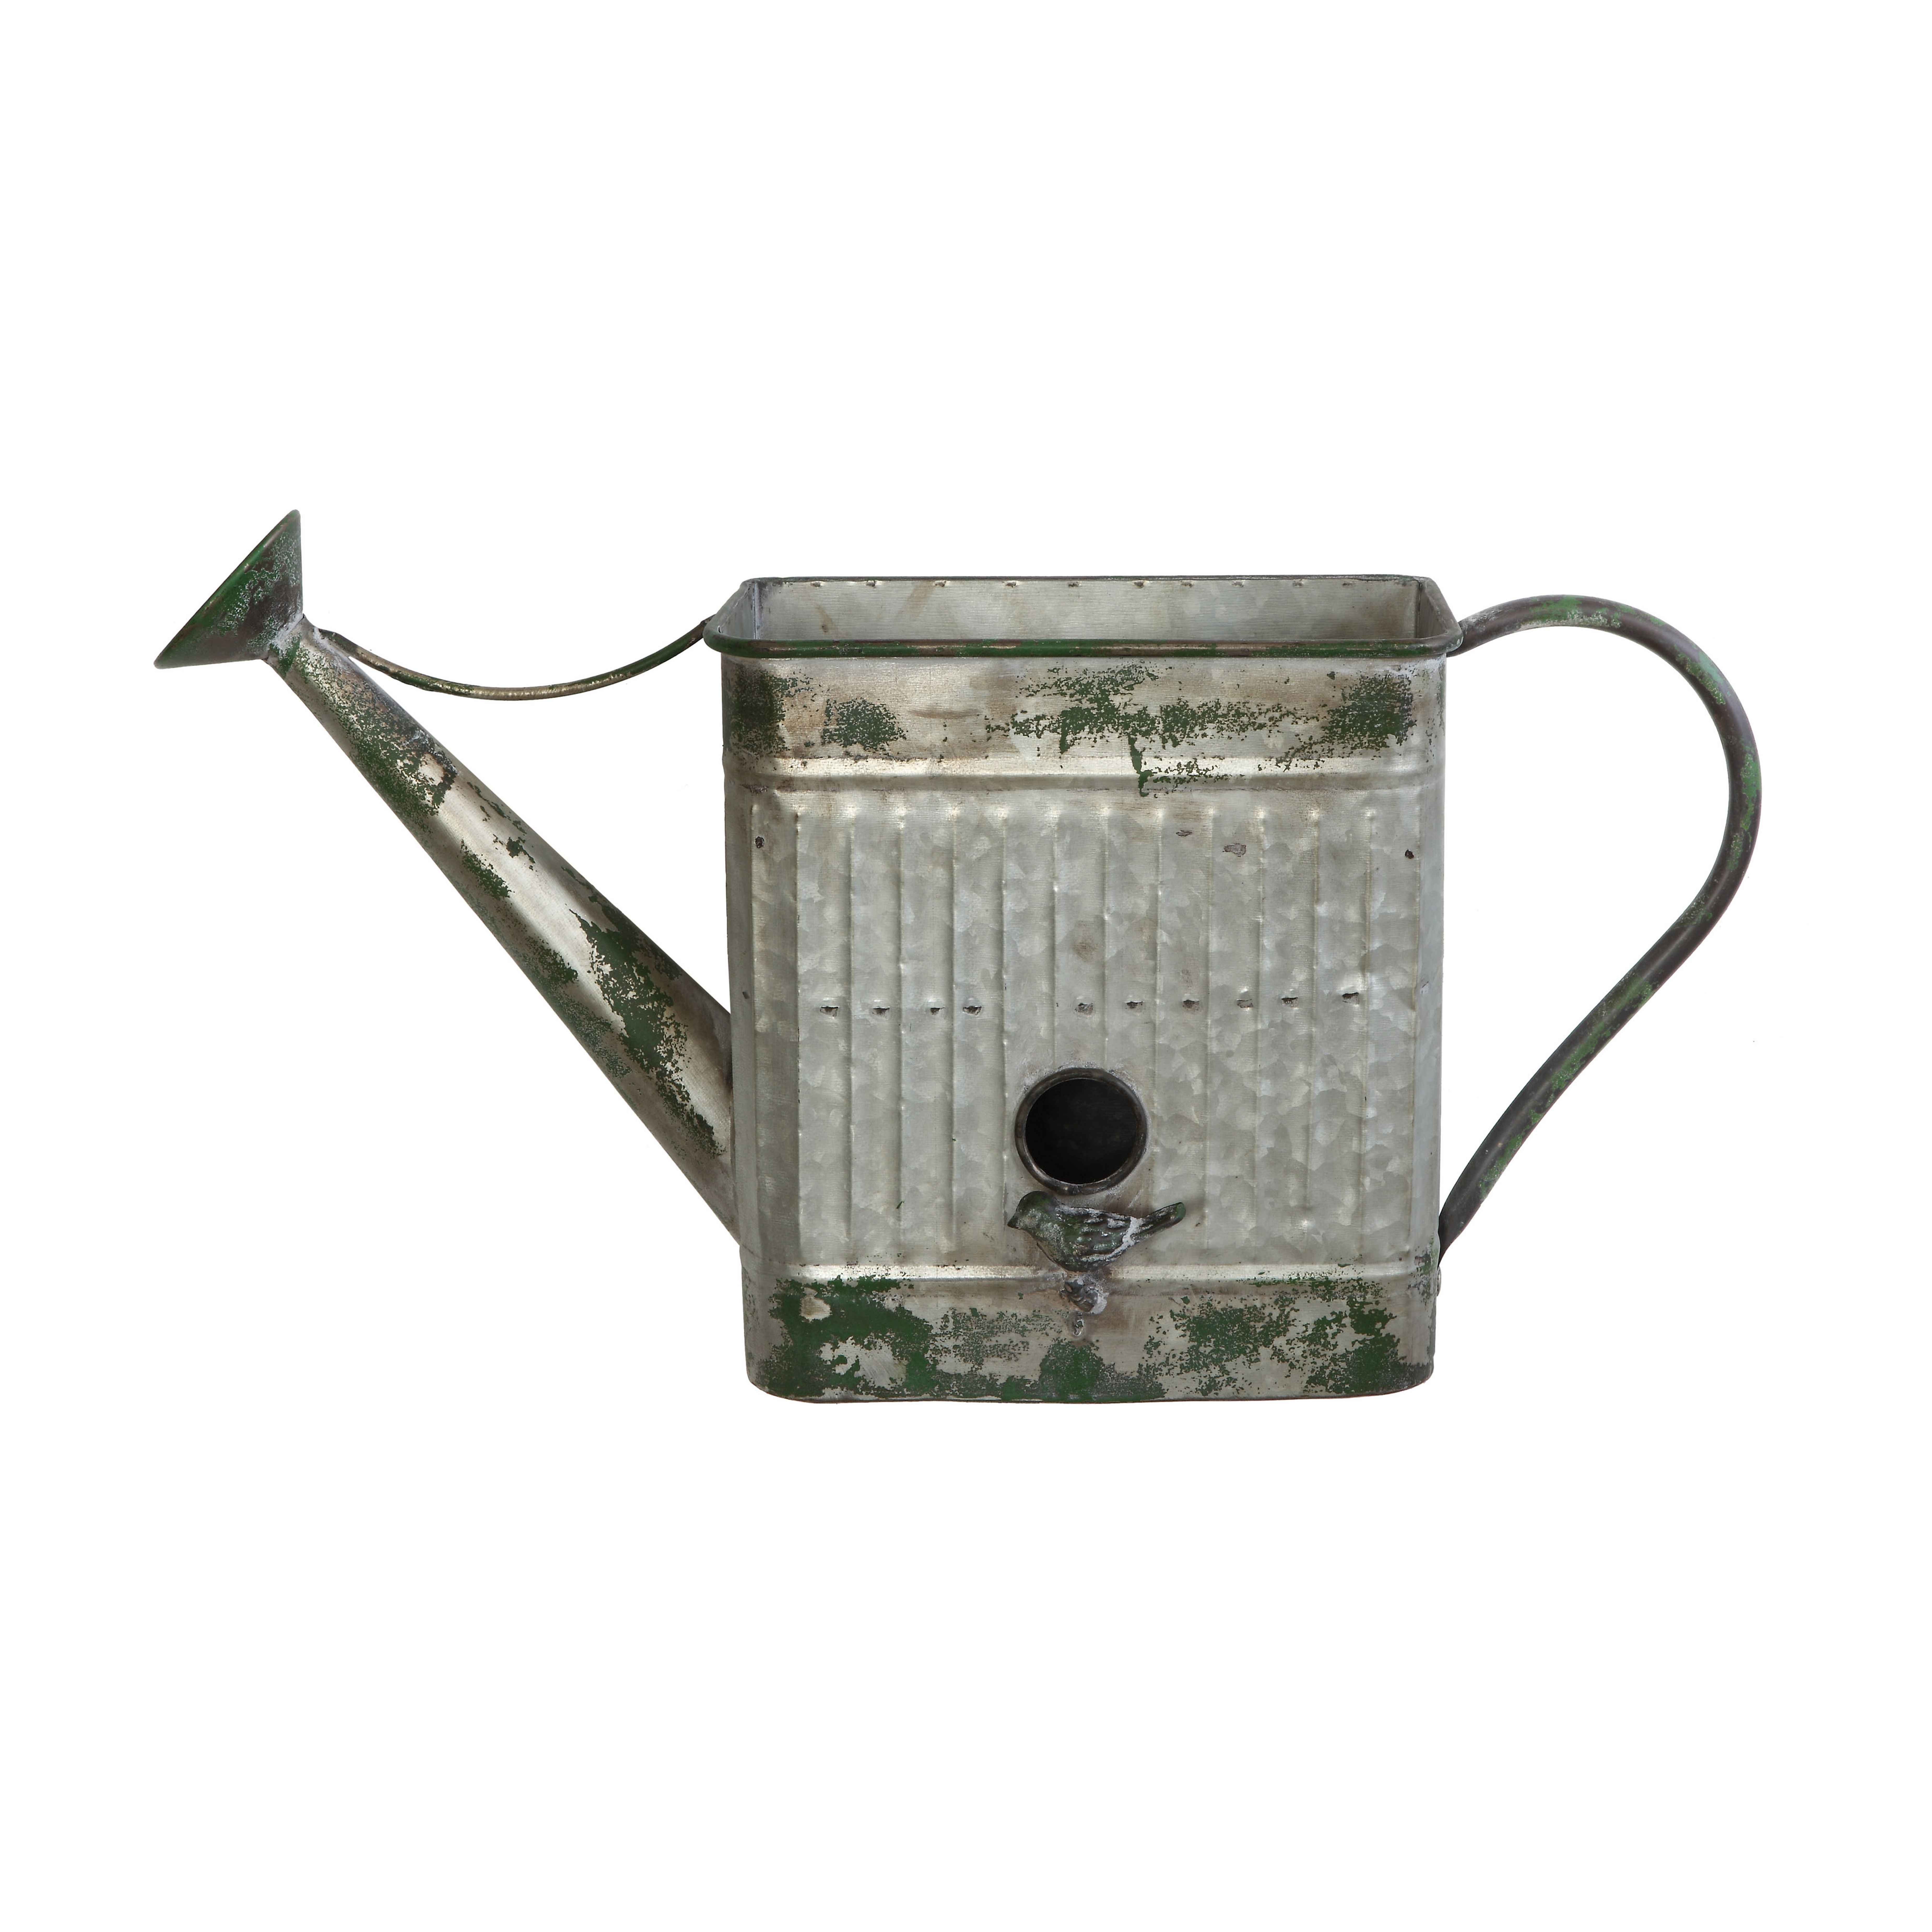 Decorative Watering Can/Birdhouse Container - Nomad Home